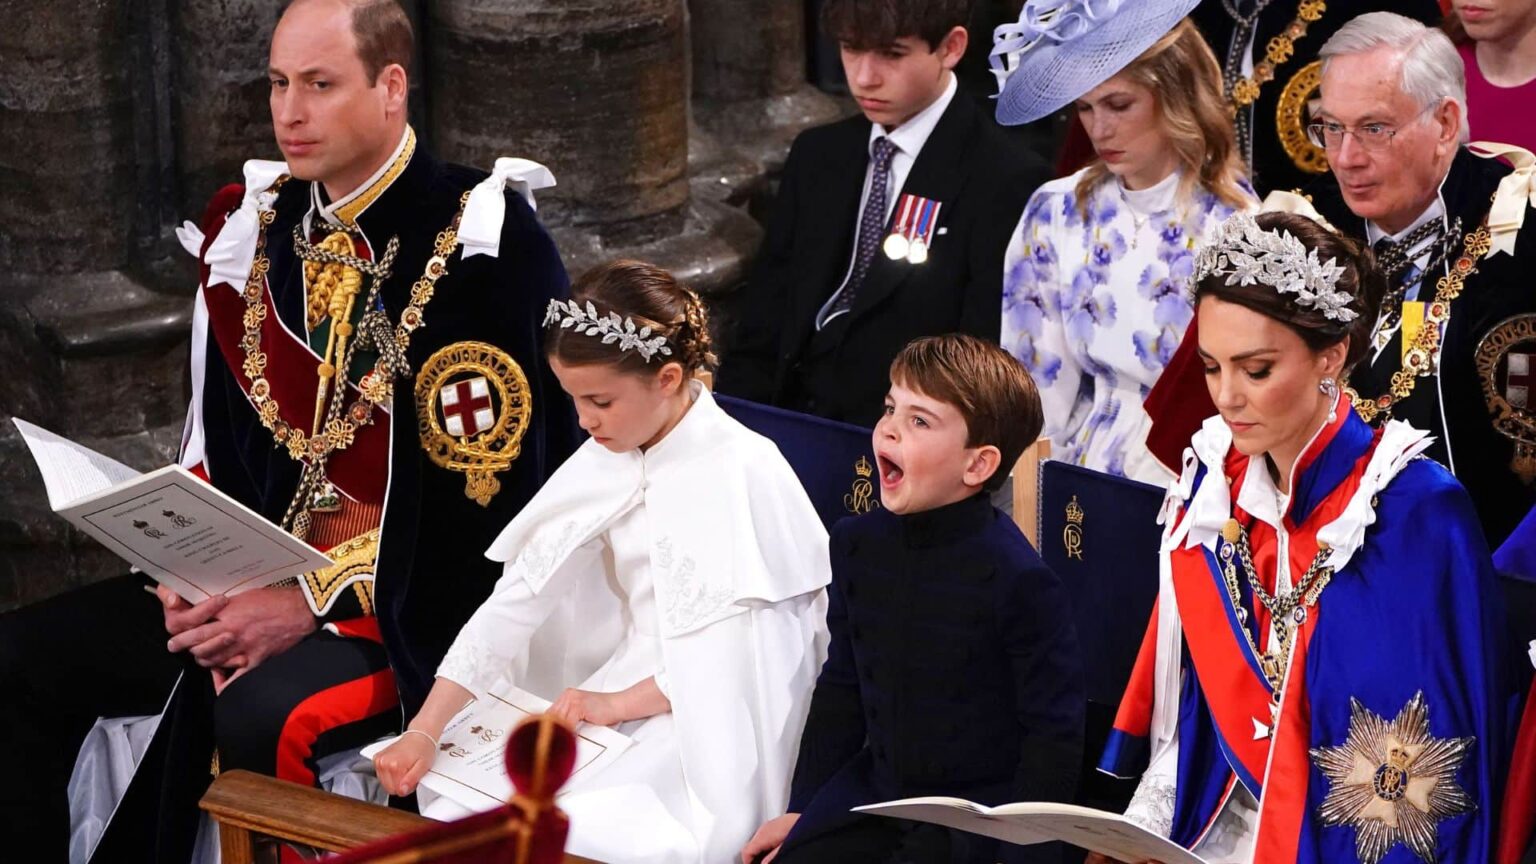 #TheMoment Prince Louis stole the show at the